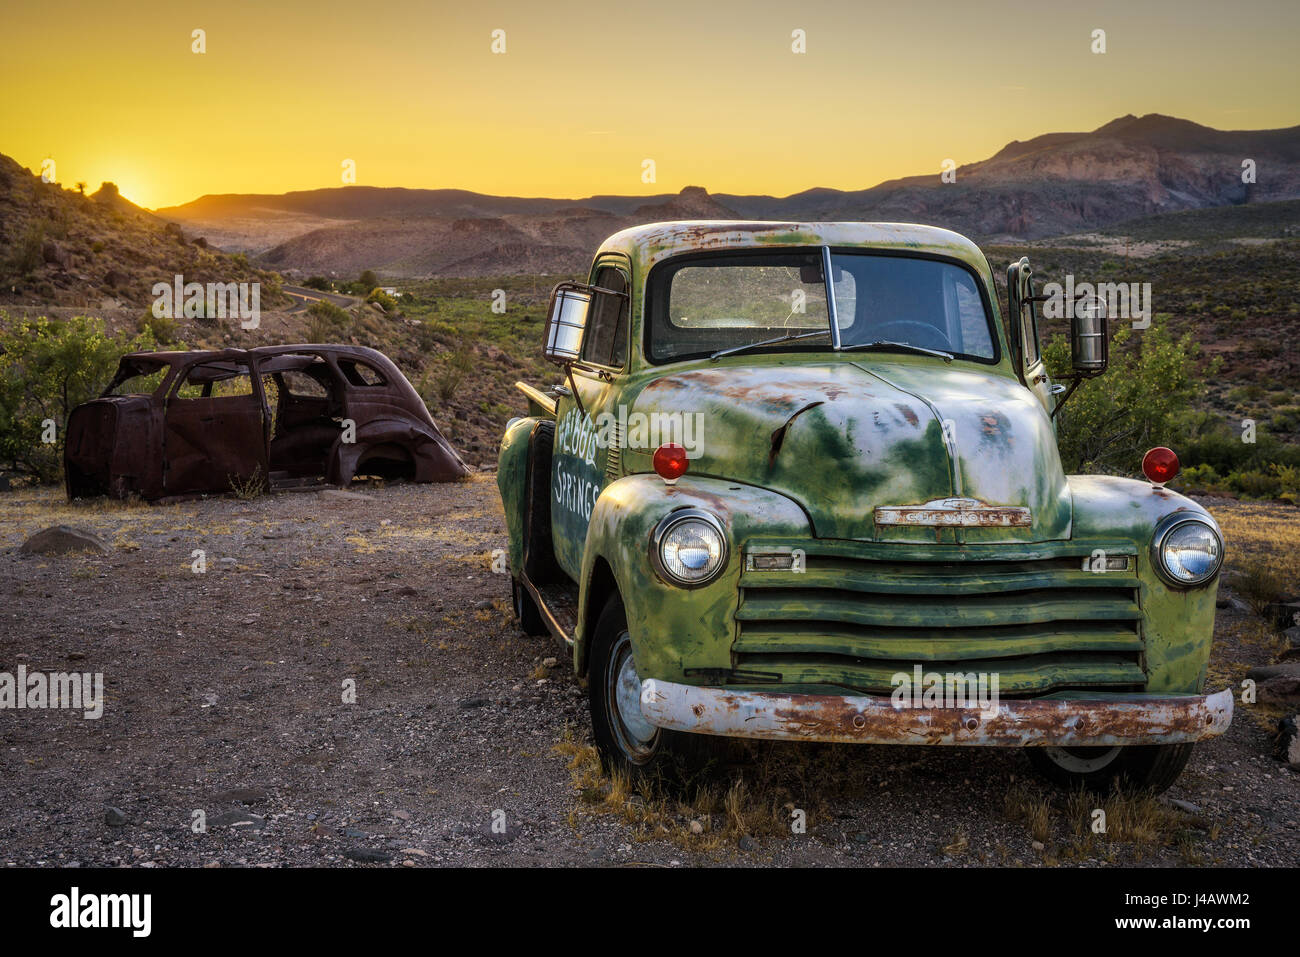 COOL SPRINGS, ARIZONA, USA - MAY 19, 2016: Car wrecks in the Mojave desert on historic route 66 at sunset. Stock Photo